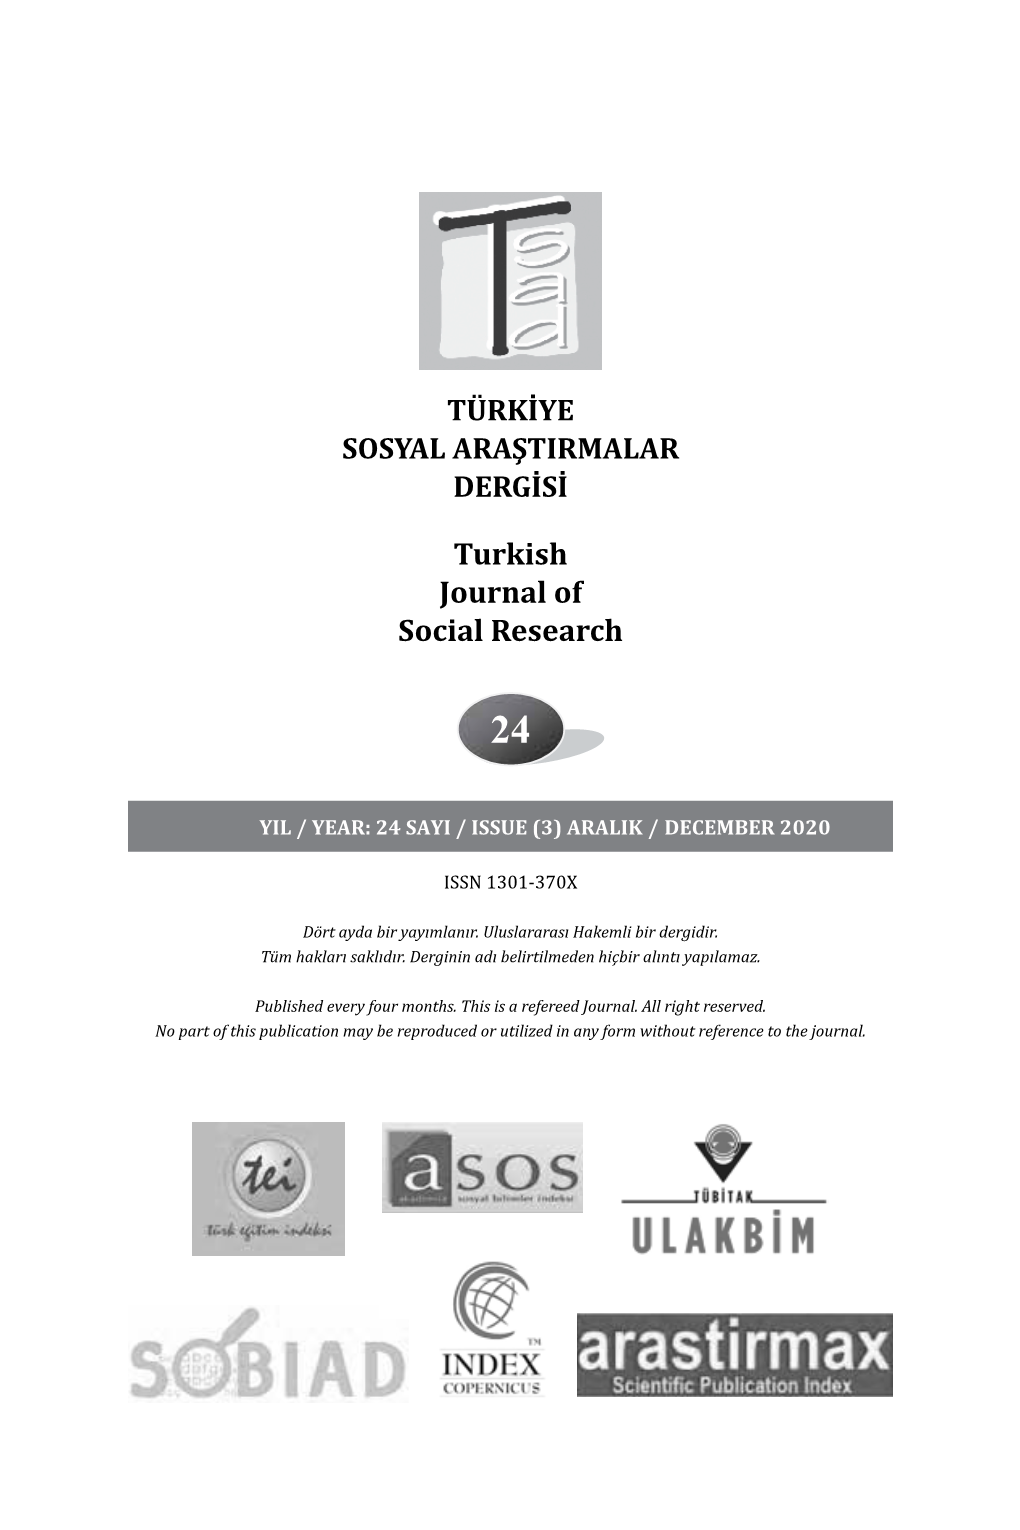 Turkish Journal of Social Research